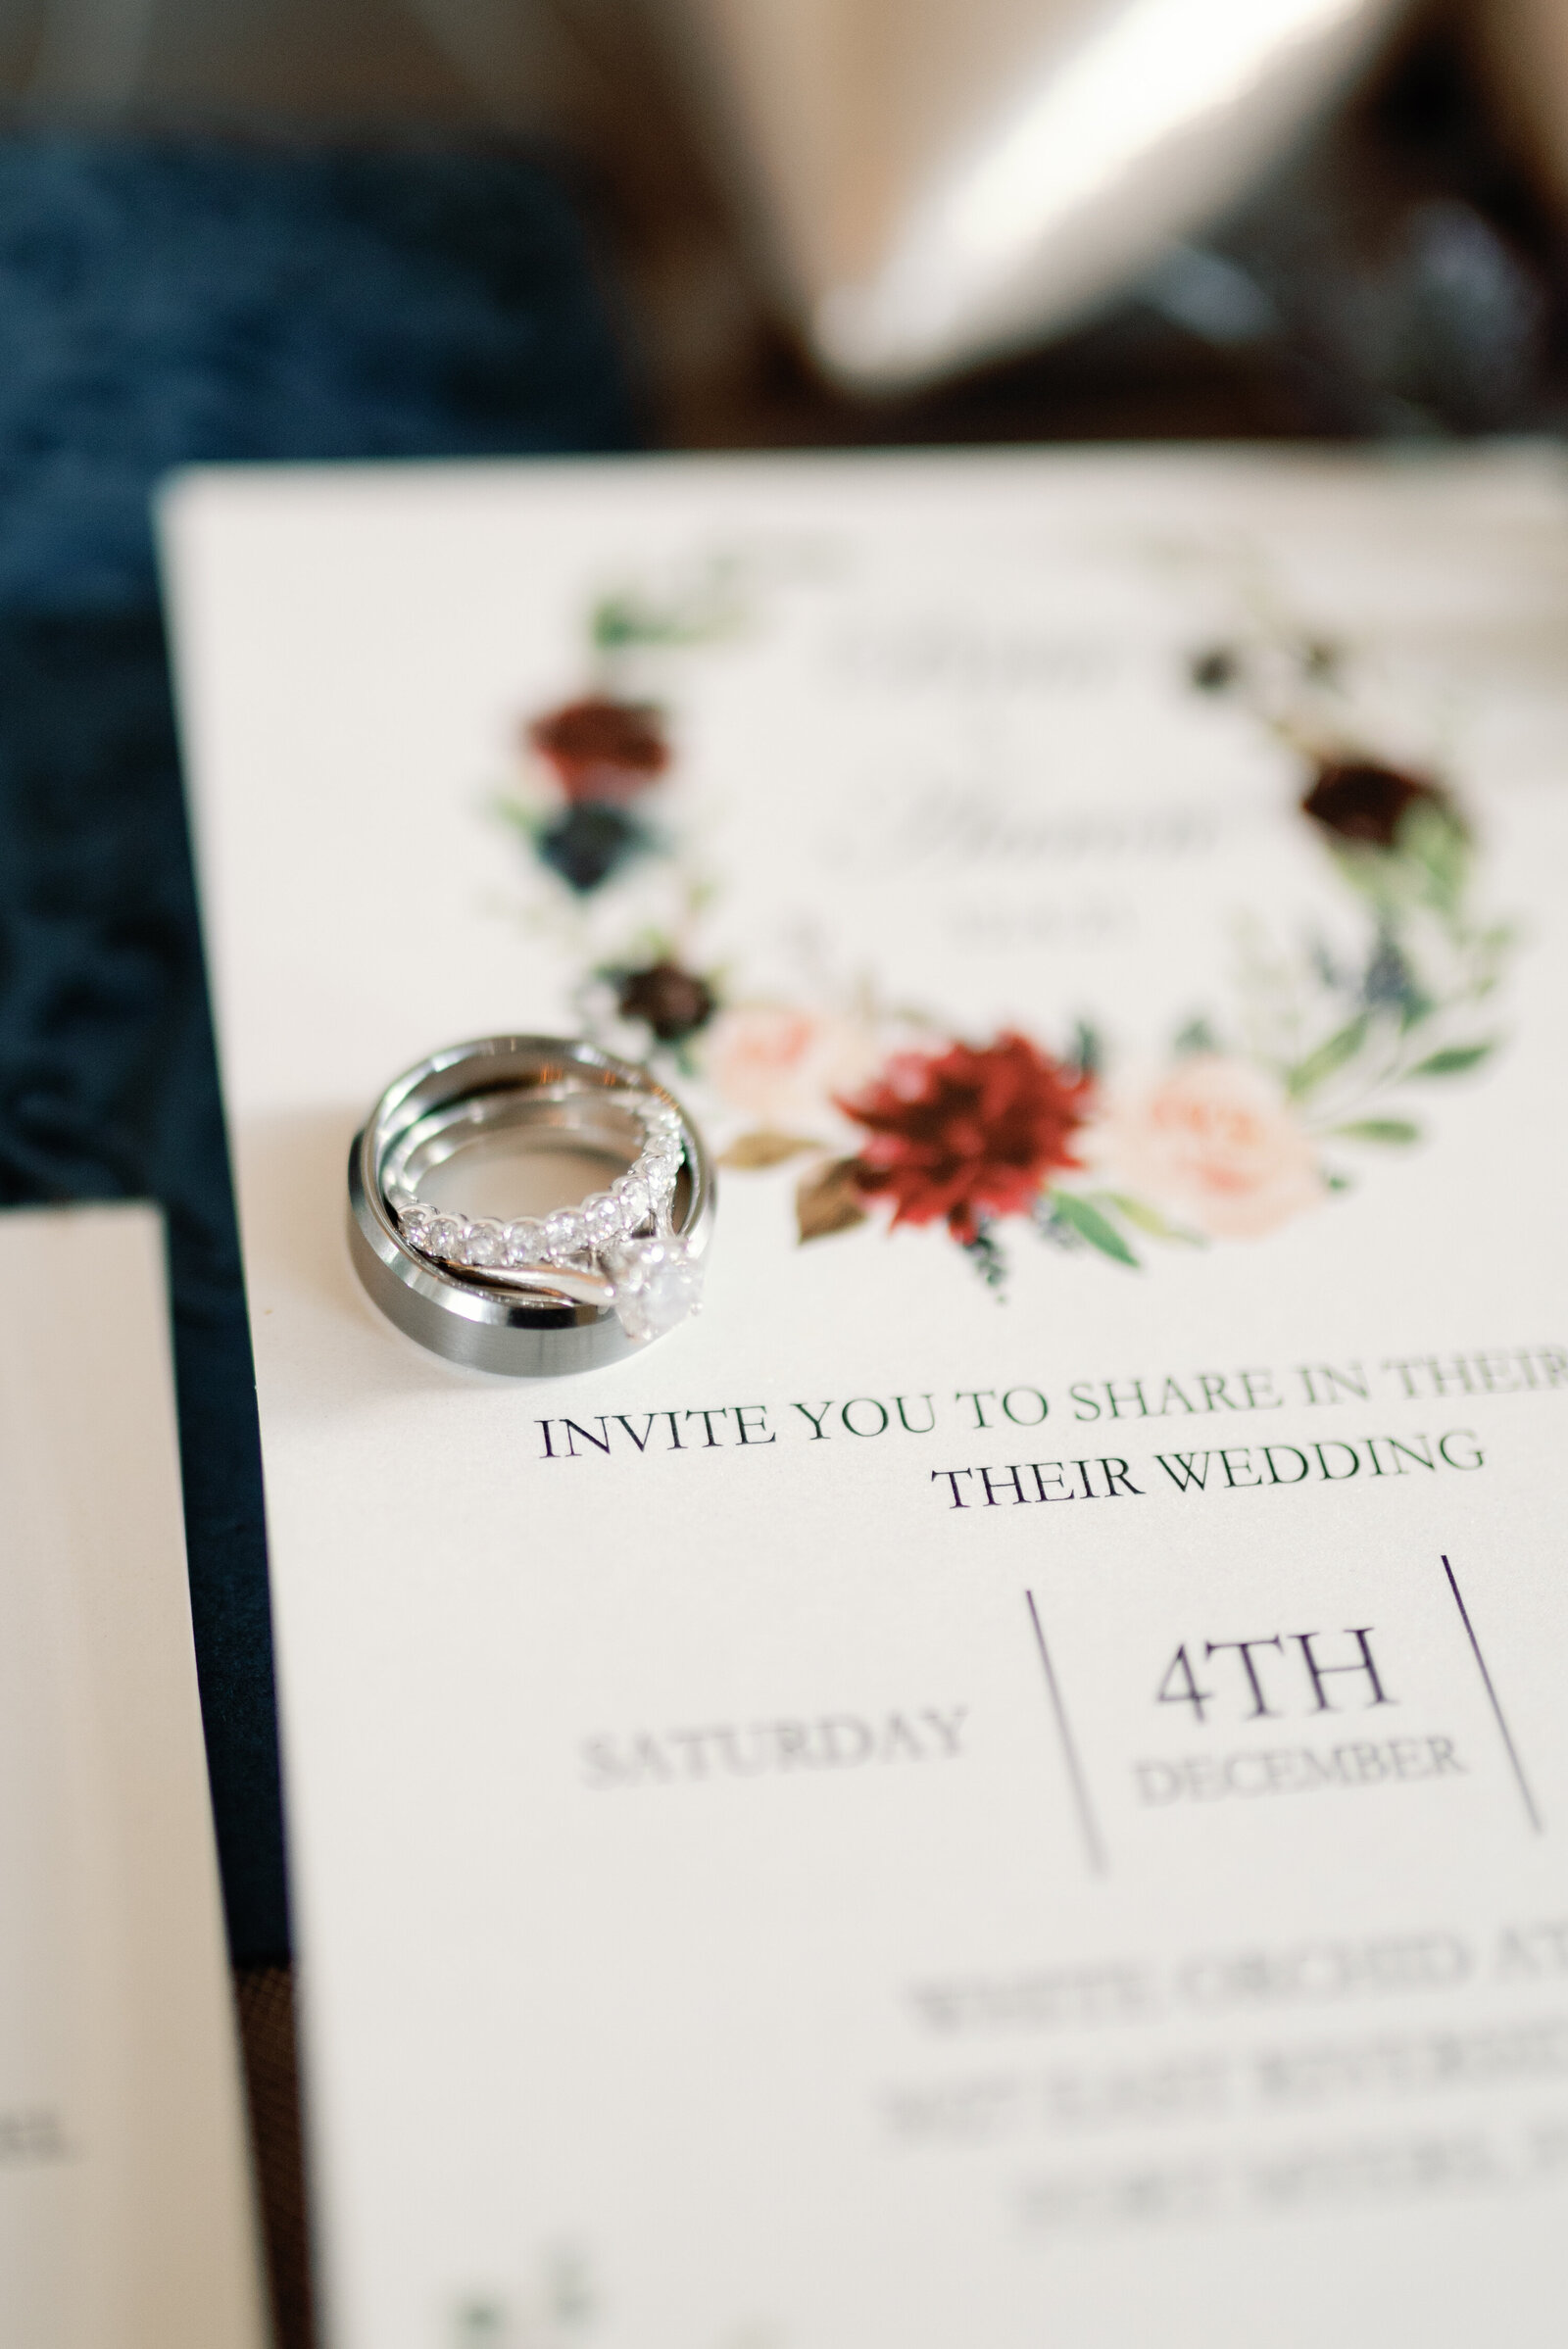 close up detail photograph showing the wedding rings witting on a wedding invitation